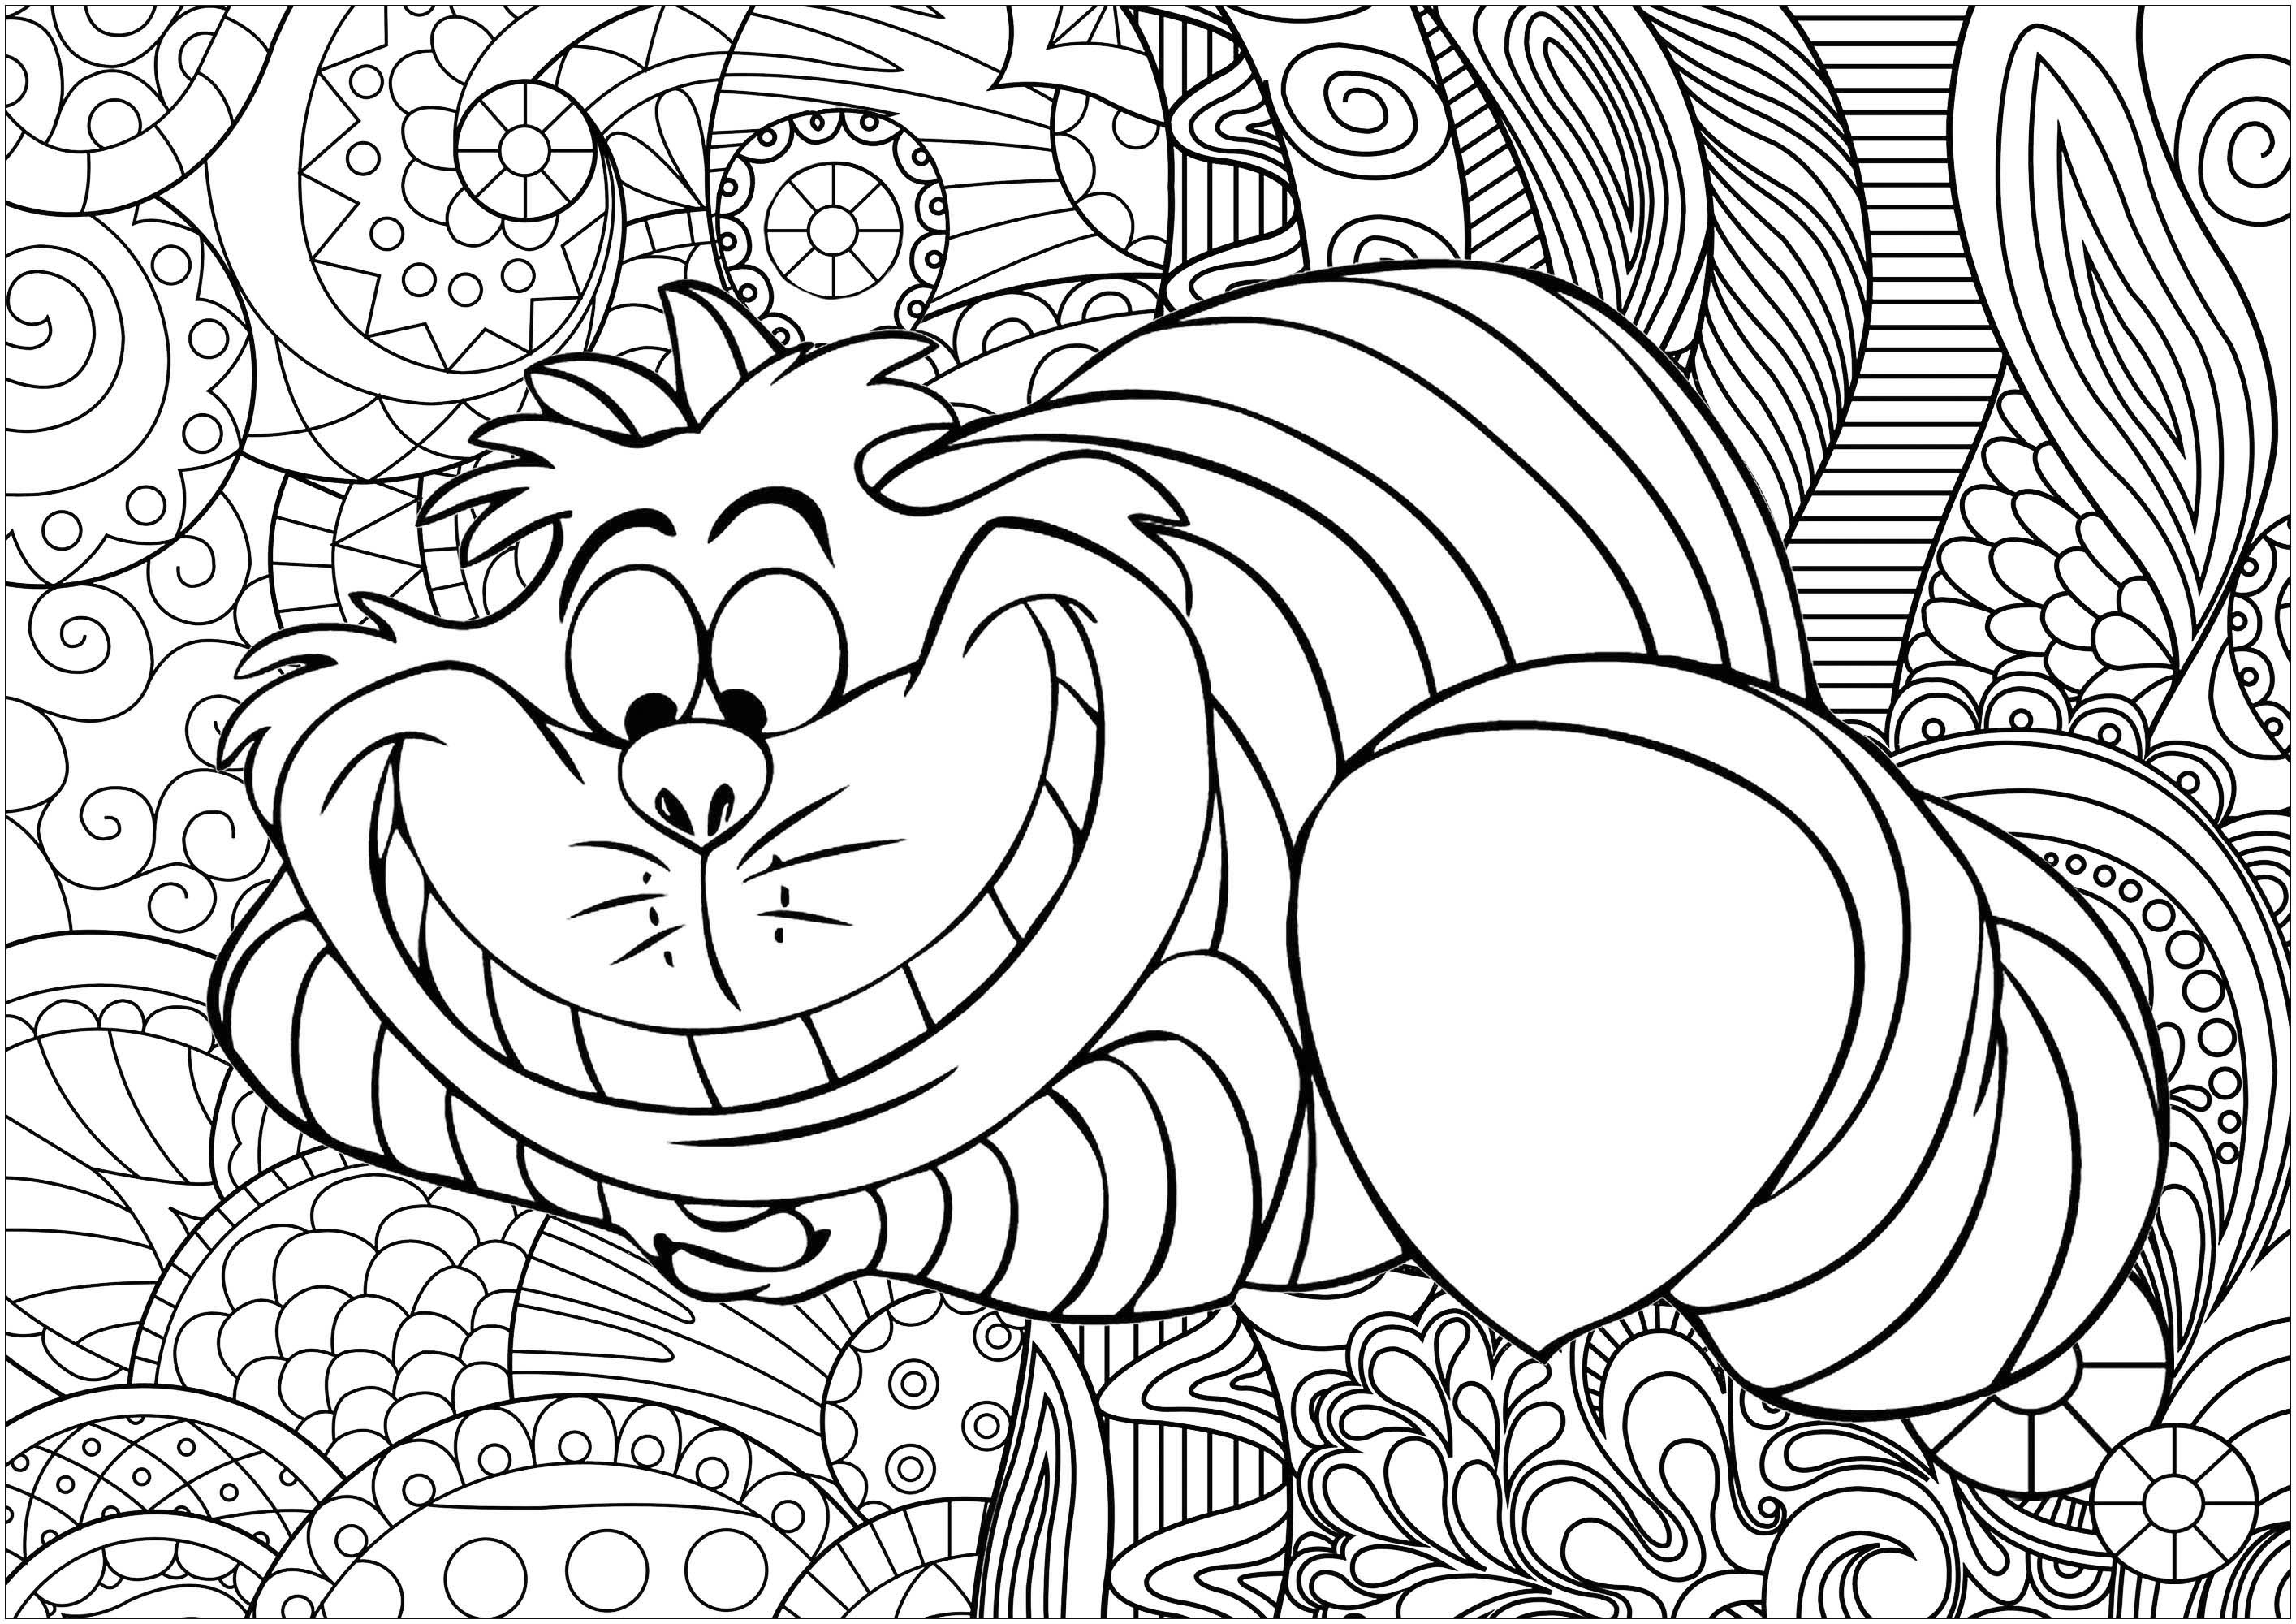 Color the famous Cheshire cat from Alice's Adventures in Wonderland written by Lewis Carroll, and popularised by Disney's animated movie. Background by Caillou.